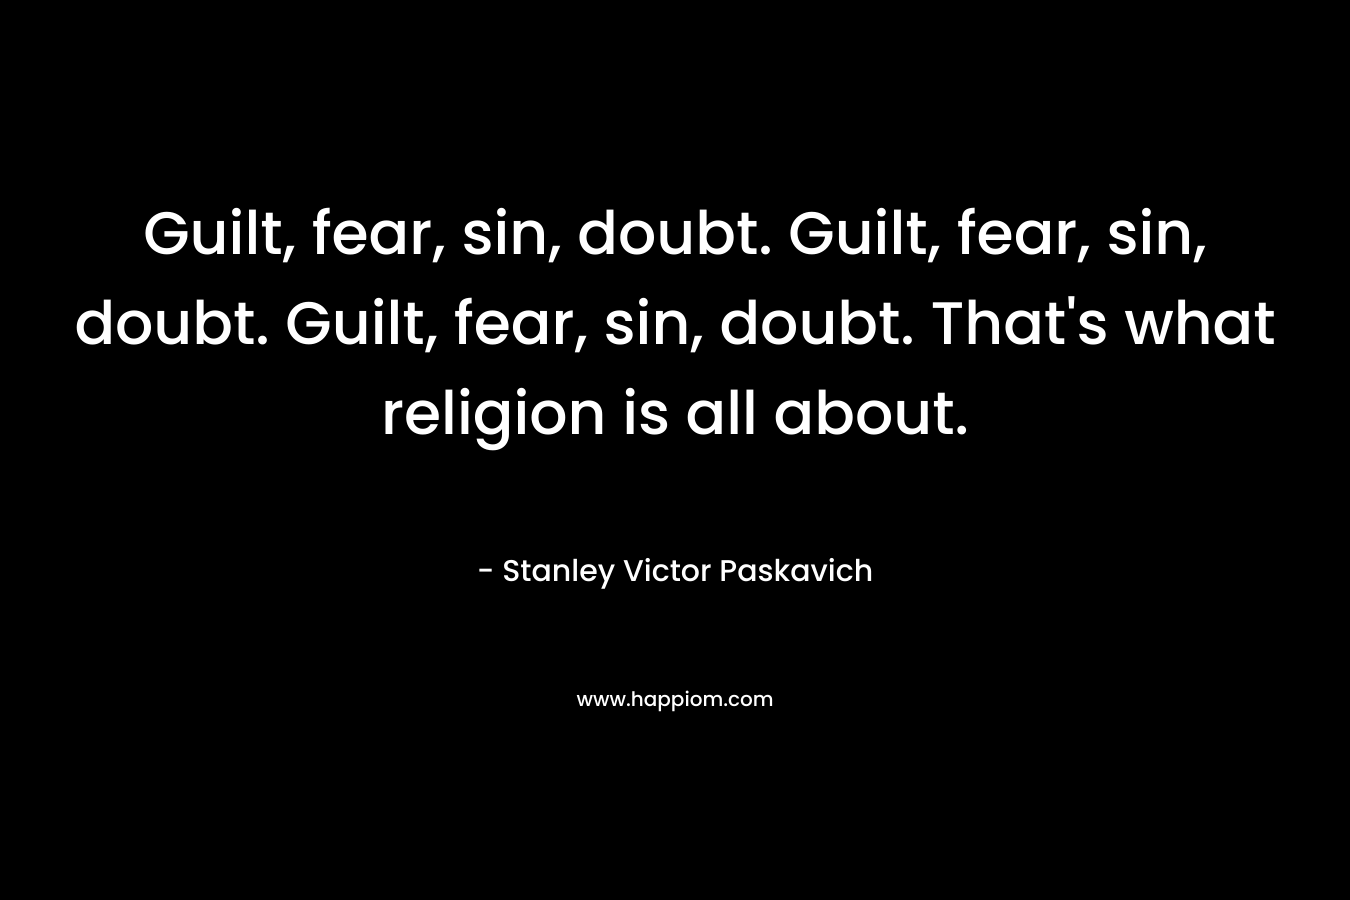 Guilt, fear, sin, doubt. Guilt, fear, sin, doubt. Guilt, fear, sin, doubt. That's what religion is all about.